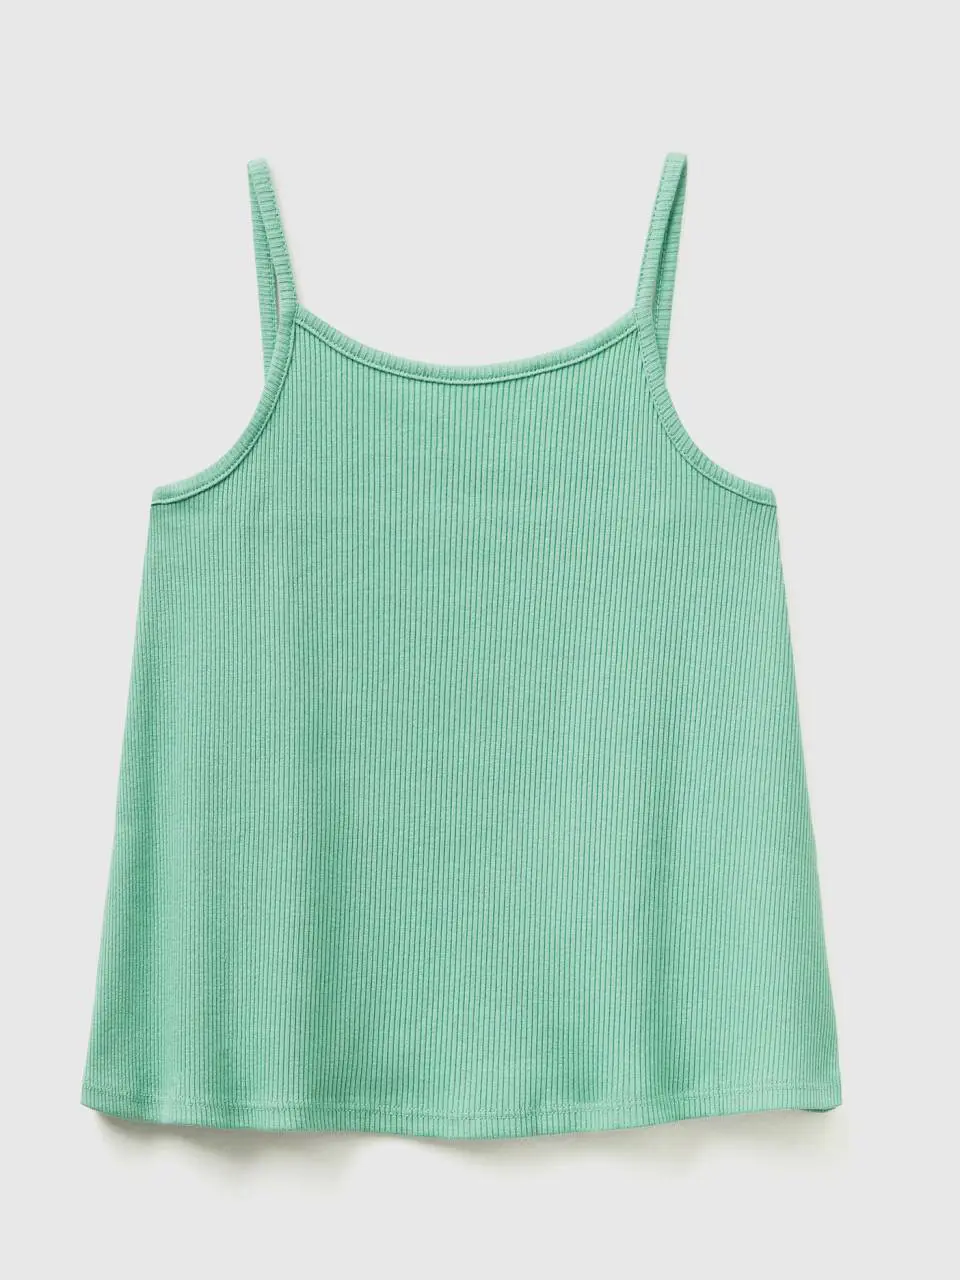 Benetton ribbed stretch cotton tank top. 1